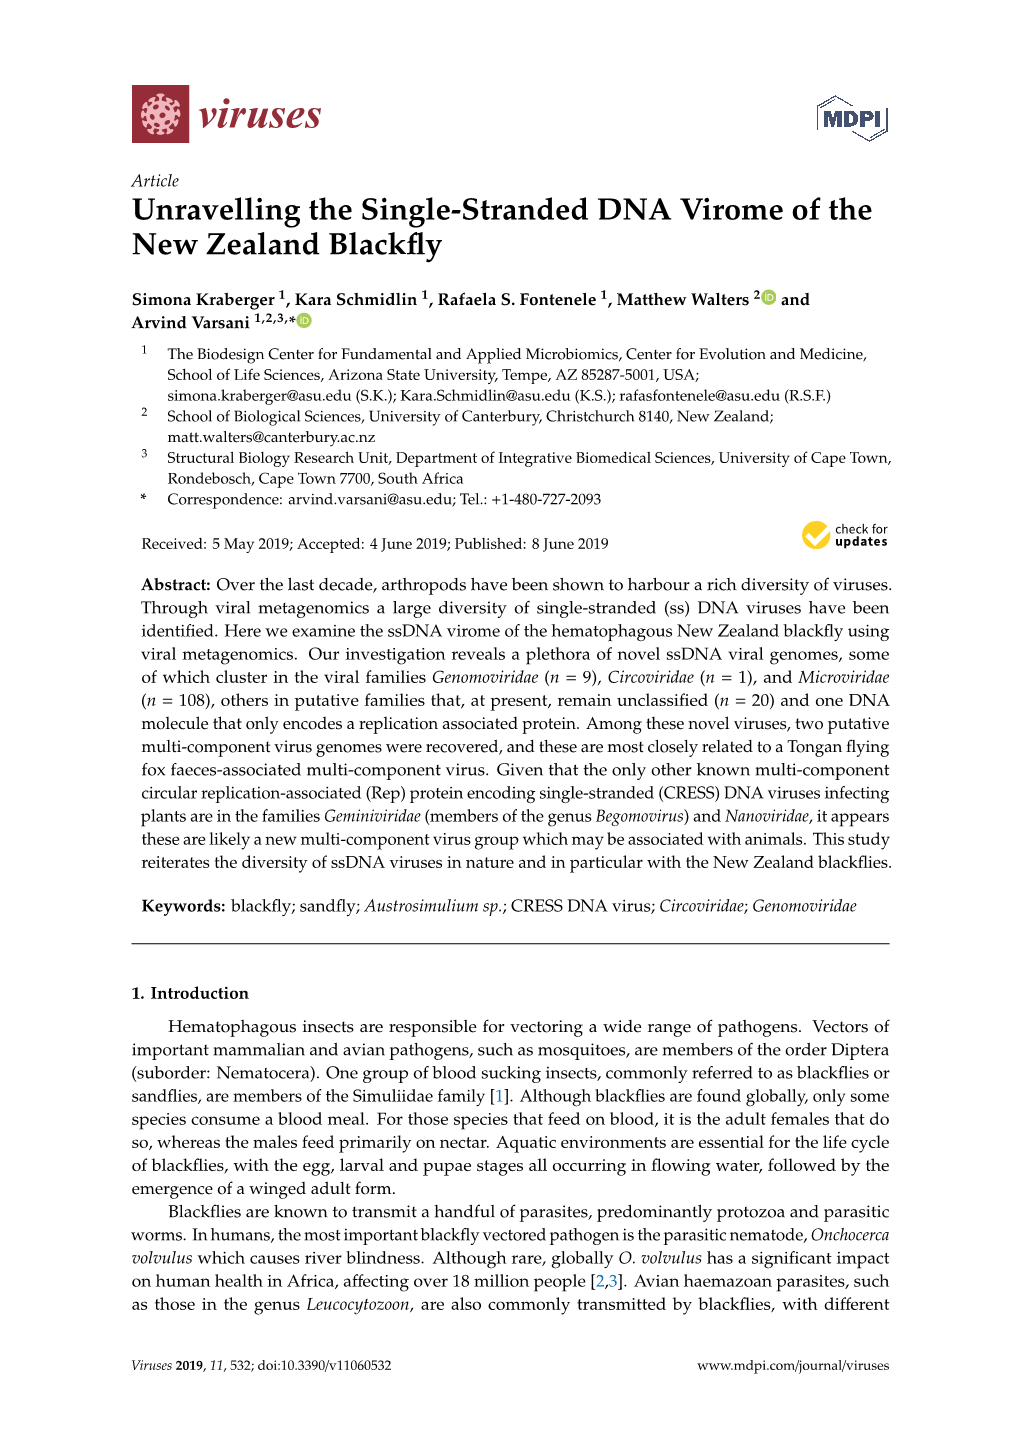 Unravelling the Single-Stranded DNA Virome of the New Zealand Blackfly